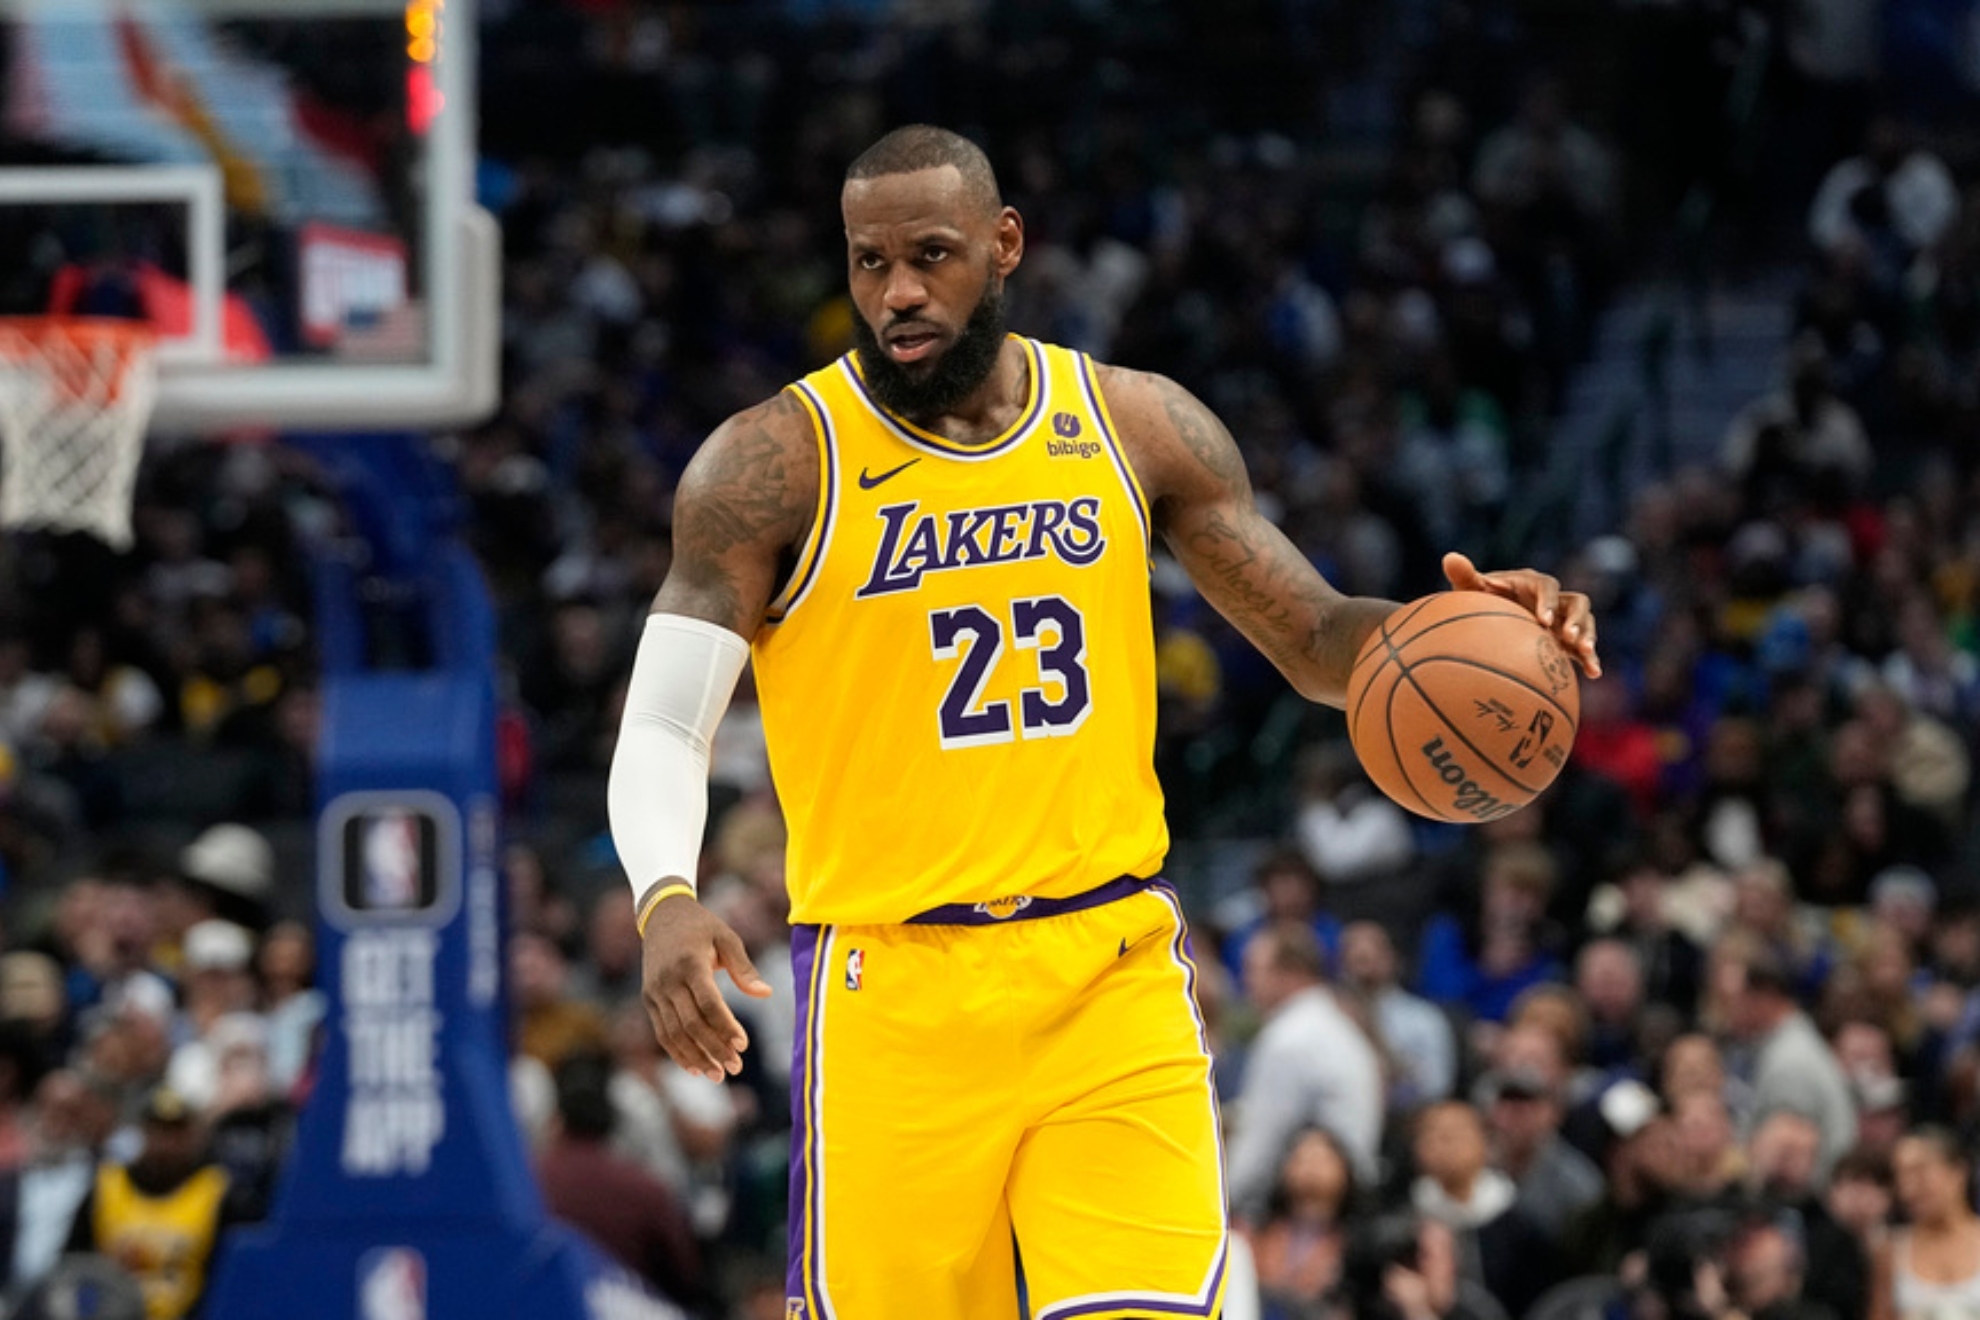 Los Angeles Lakers forward LeBron James dribbles during the second half of an NBA basketball game against the Dallas Mavericks in Dallas, Tuesday, Dec. 12, 2023. (AP Photo/LM Otero)